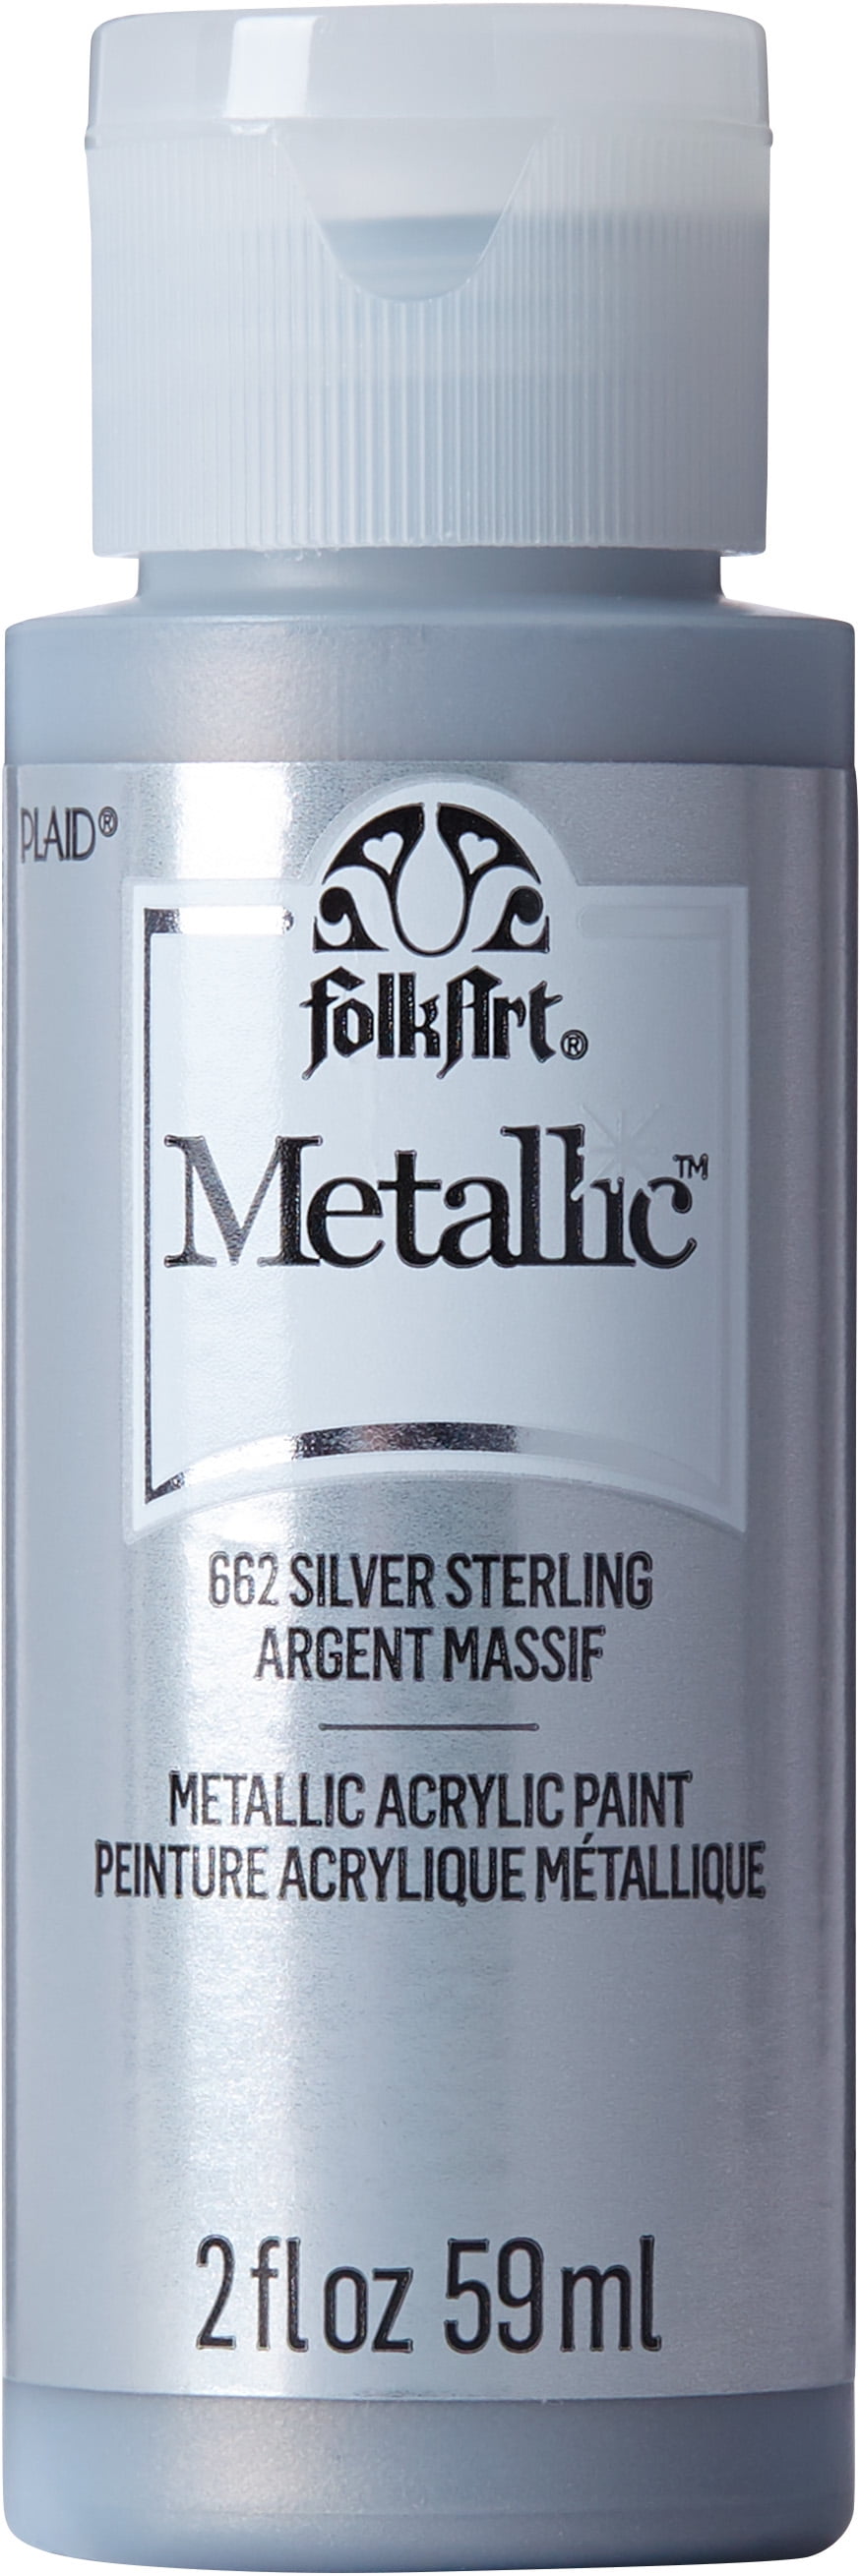 Should You Use FolkArt Metallic Paint? - It's So Corinney